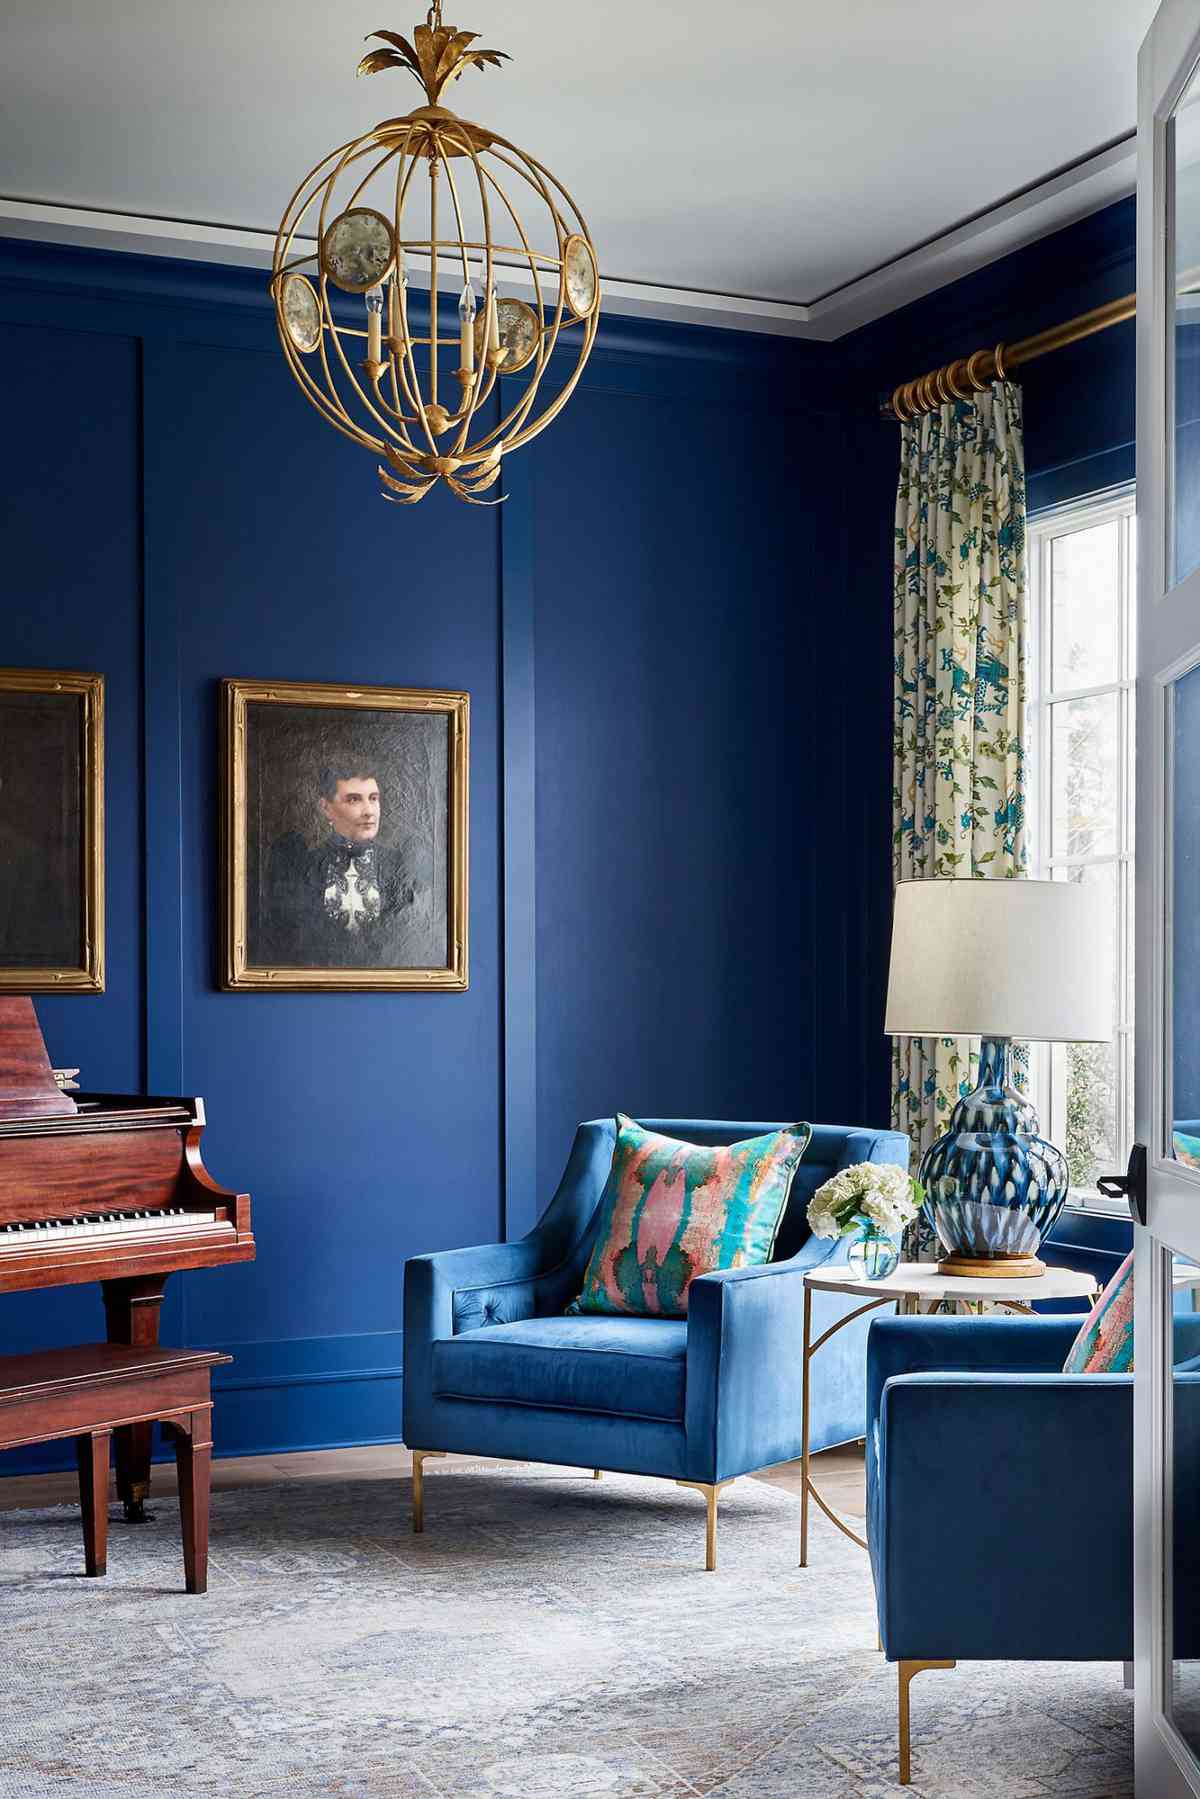 Benjamin Moore Downpour Blue 2063-20 Living Room Walls with Piano